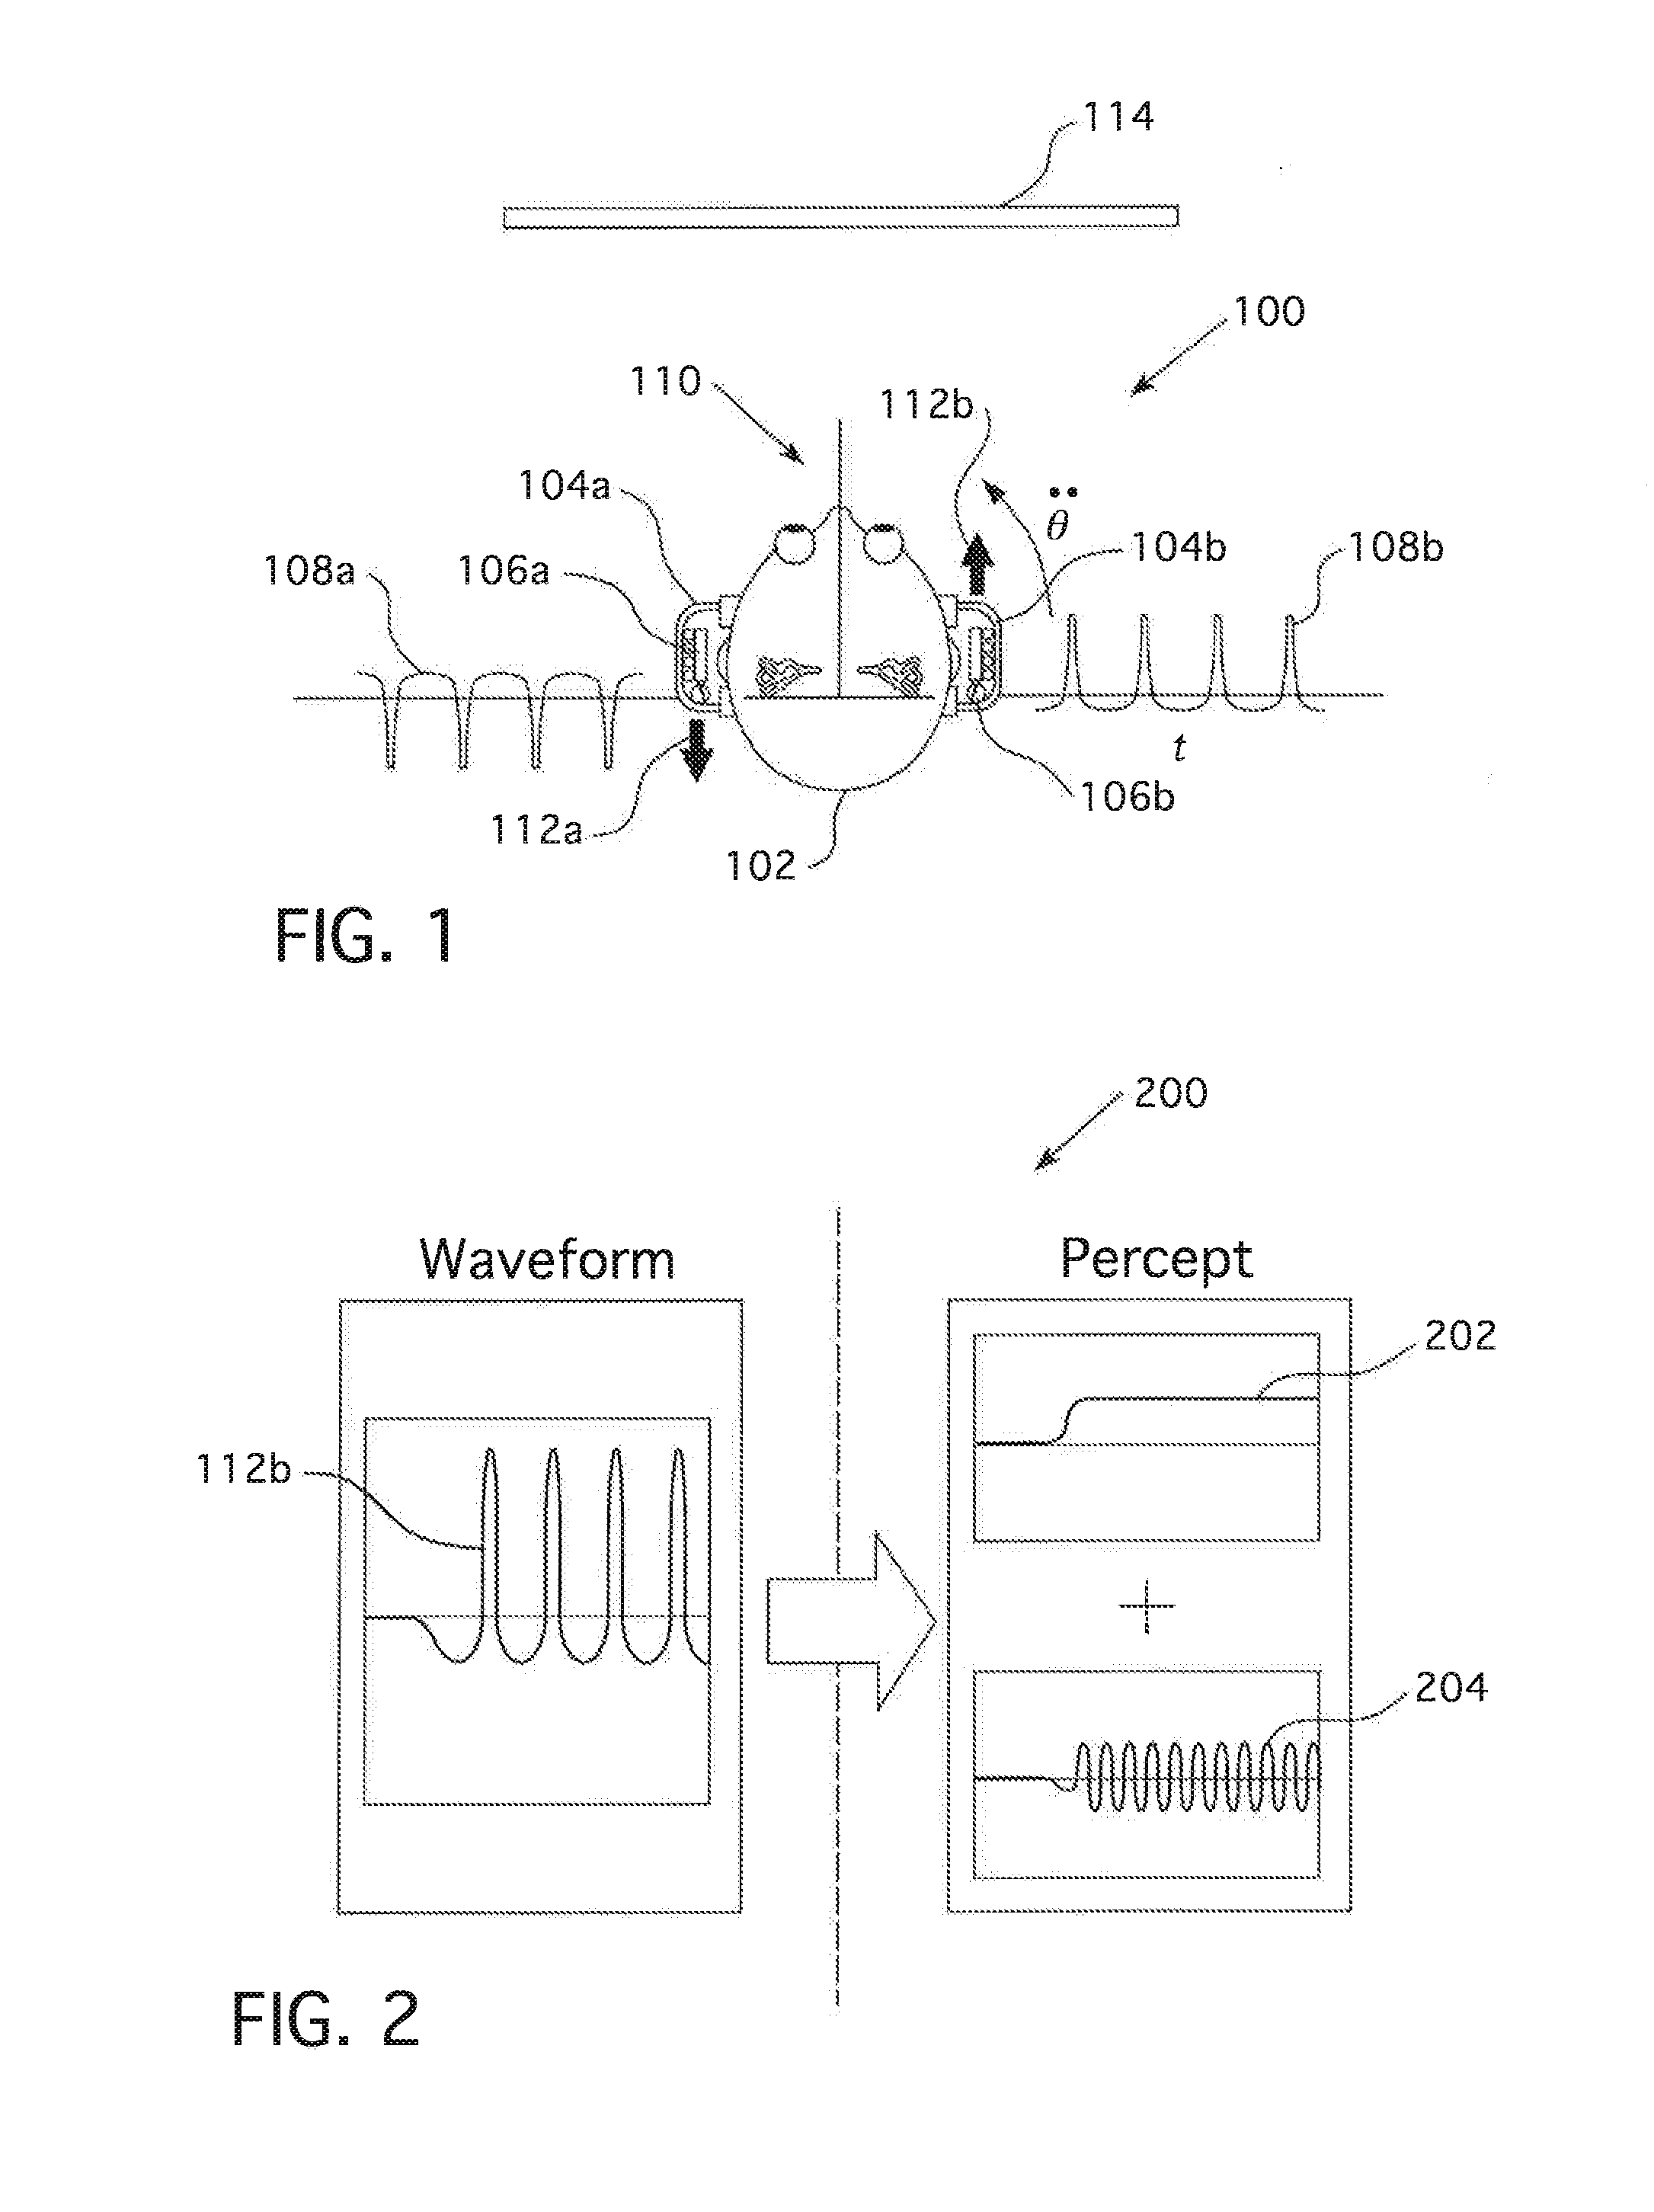 Dielectric elastomer membrane feedback apparatus, system and method